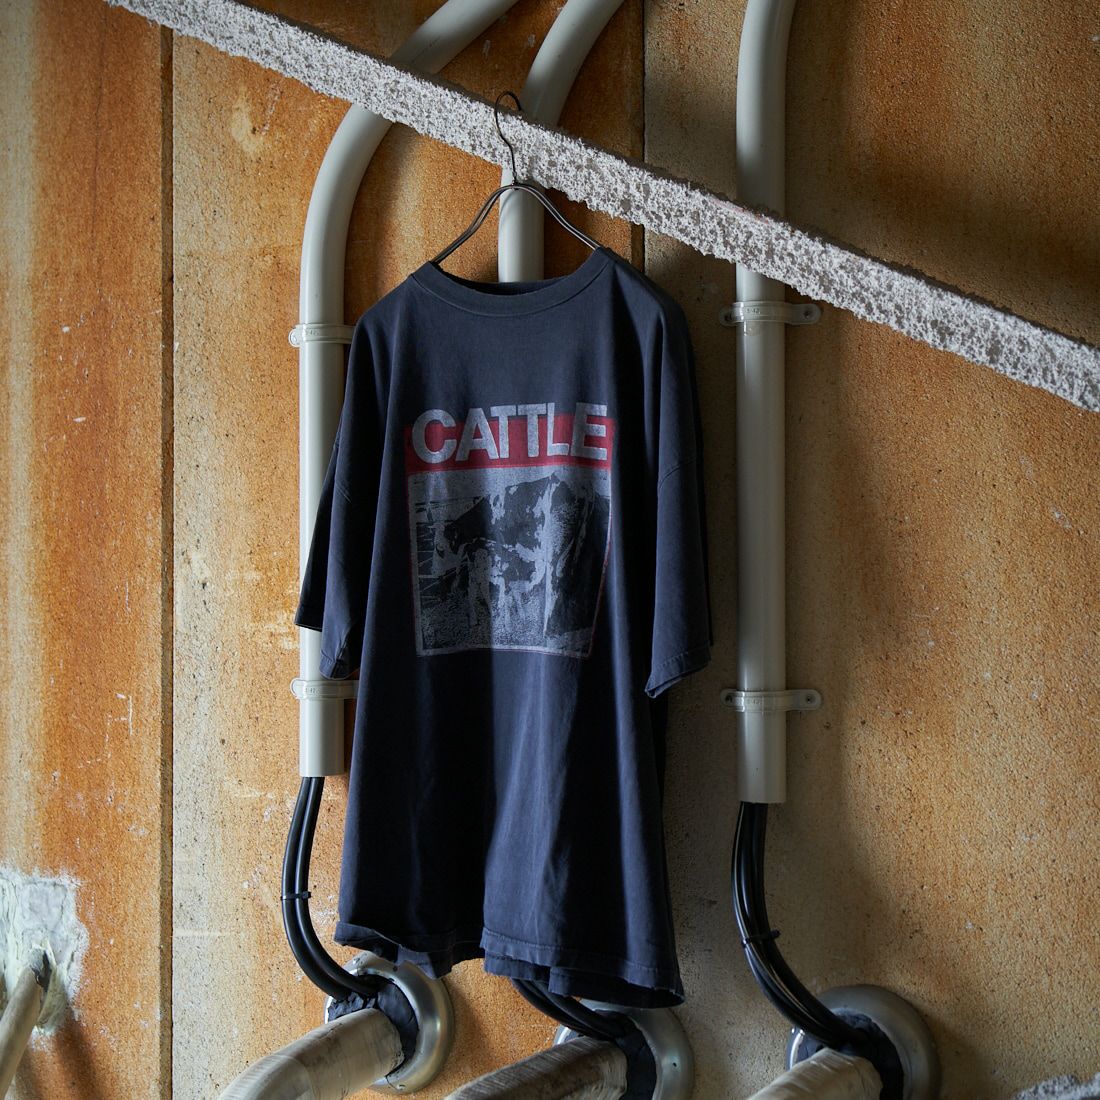 REMI RELIEF [レミレリーフ] 別注 ビッグプリントTシャツ CATTLE [RN26349305-JF] BLACK